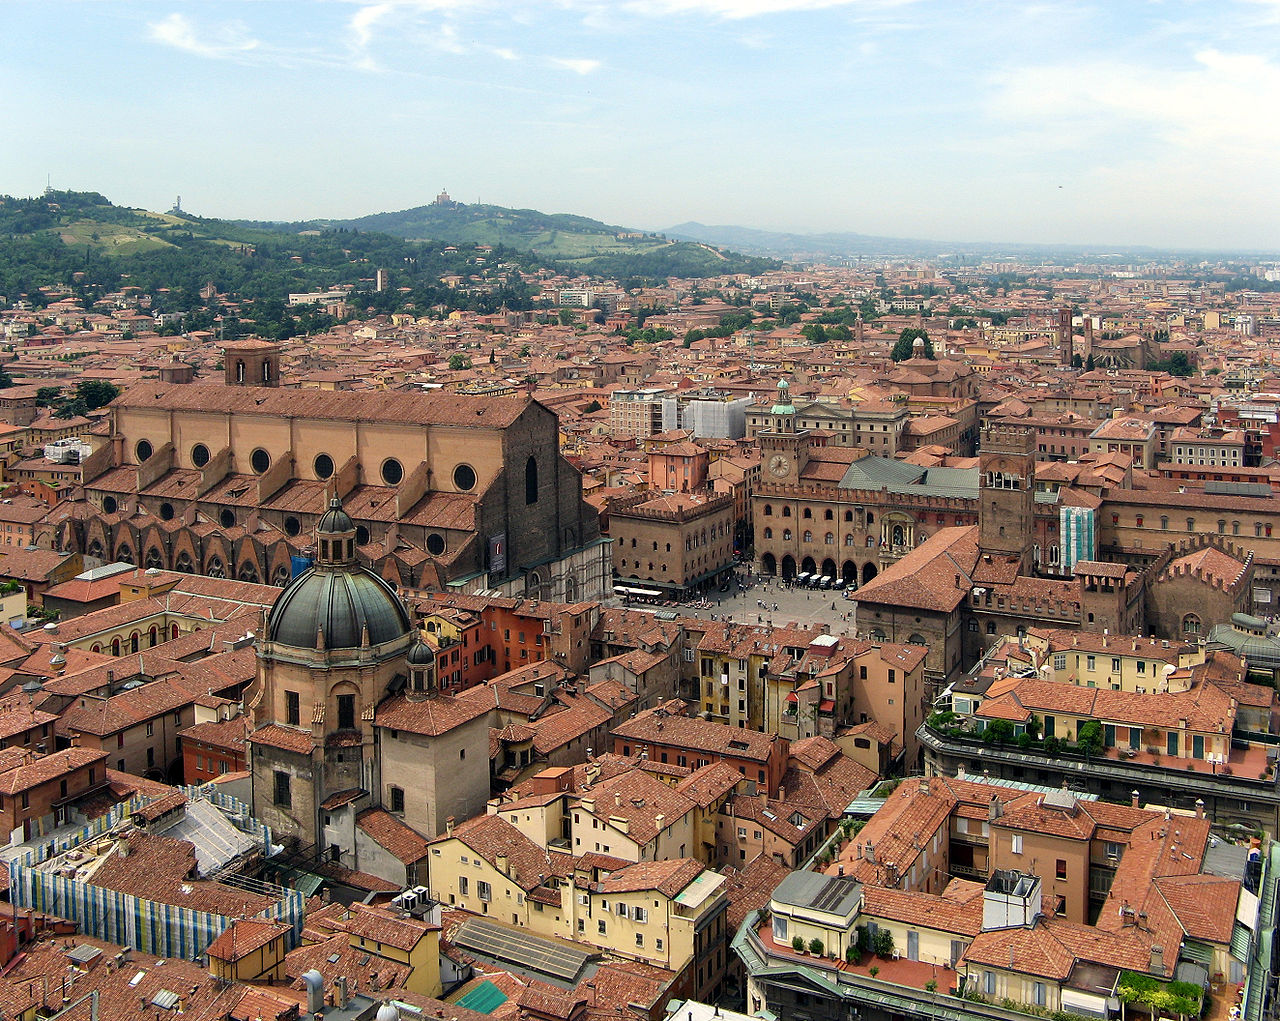 Coming soon: interregional meeting in Bologna